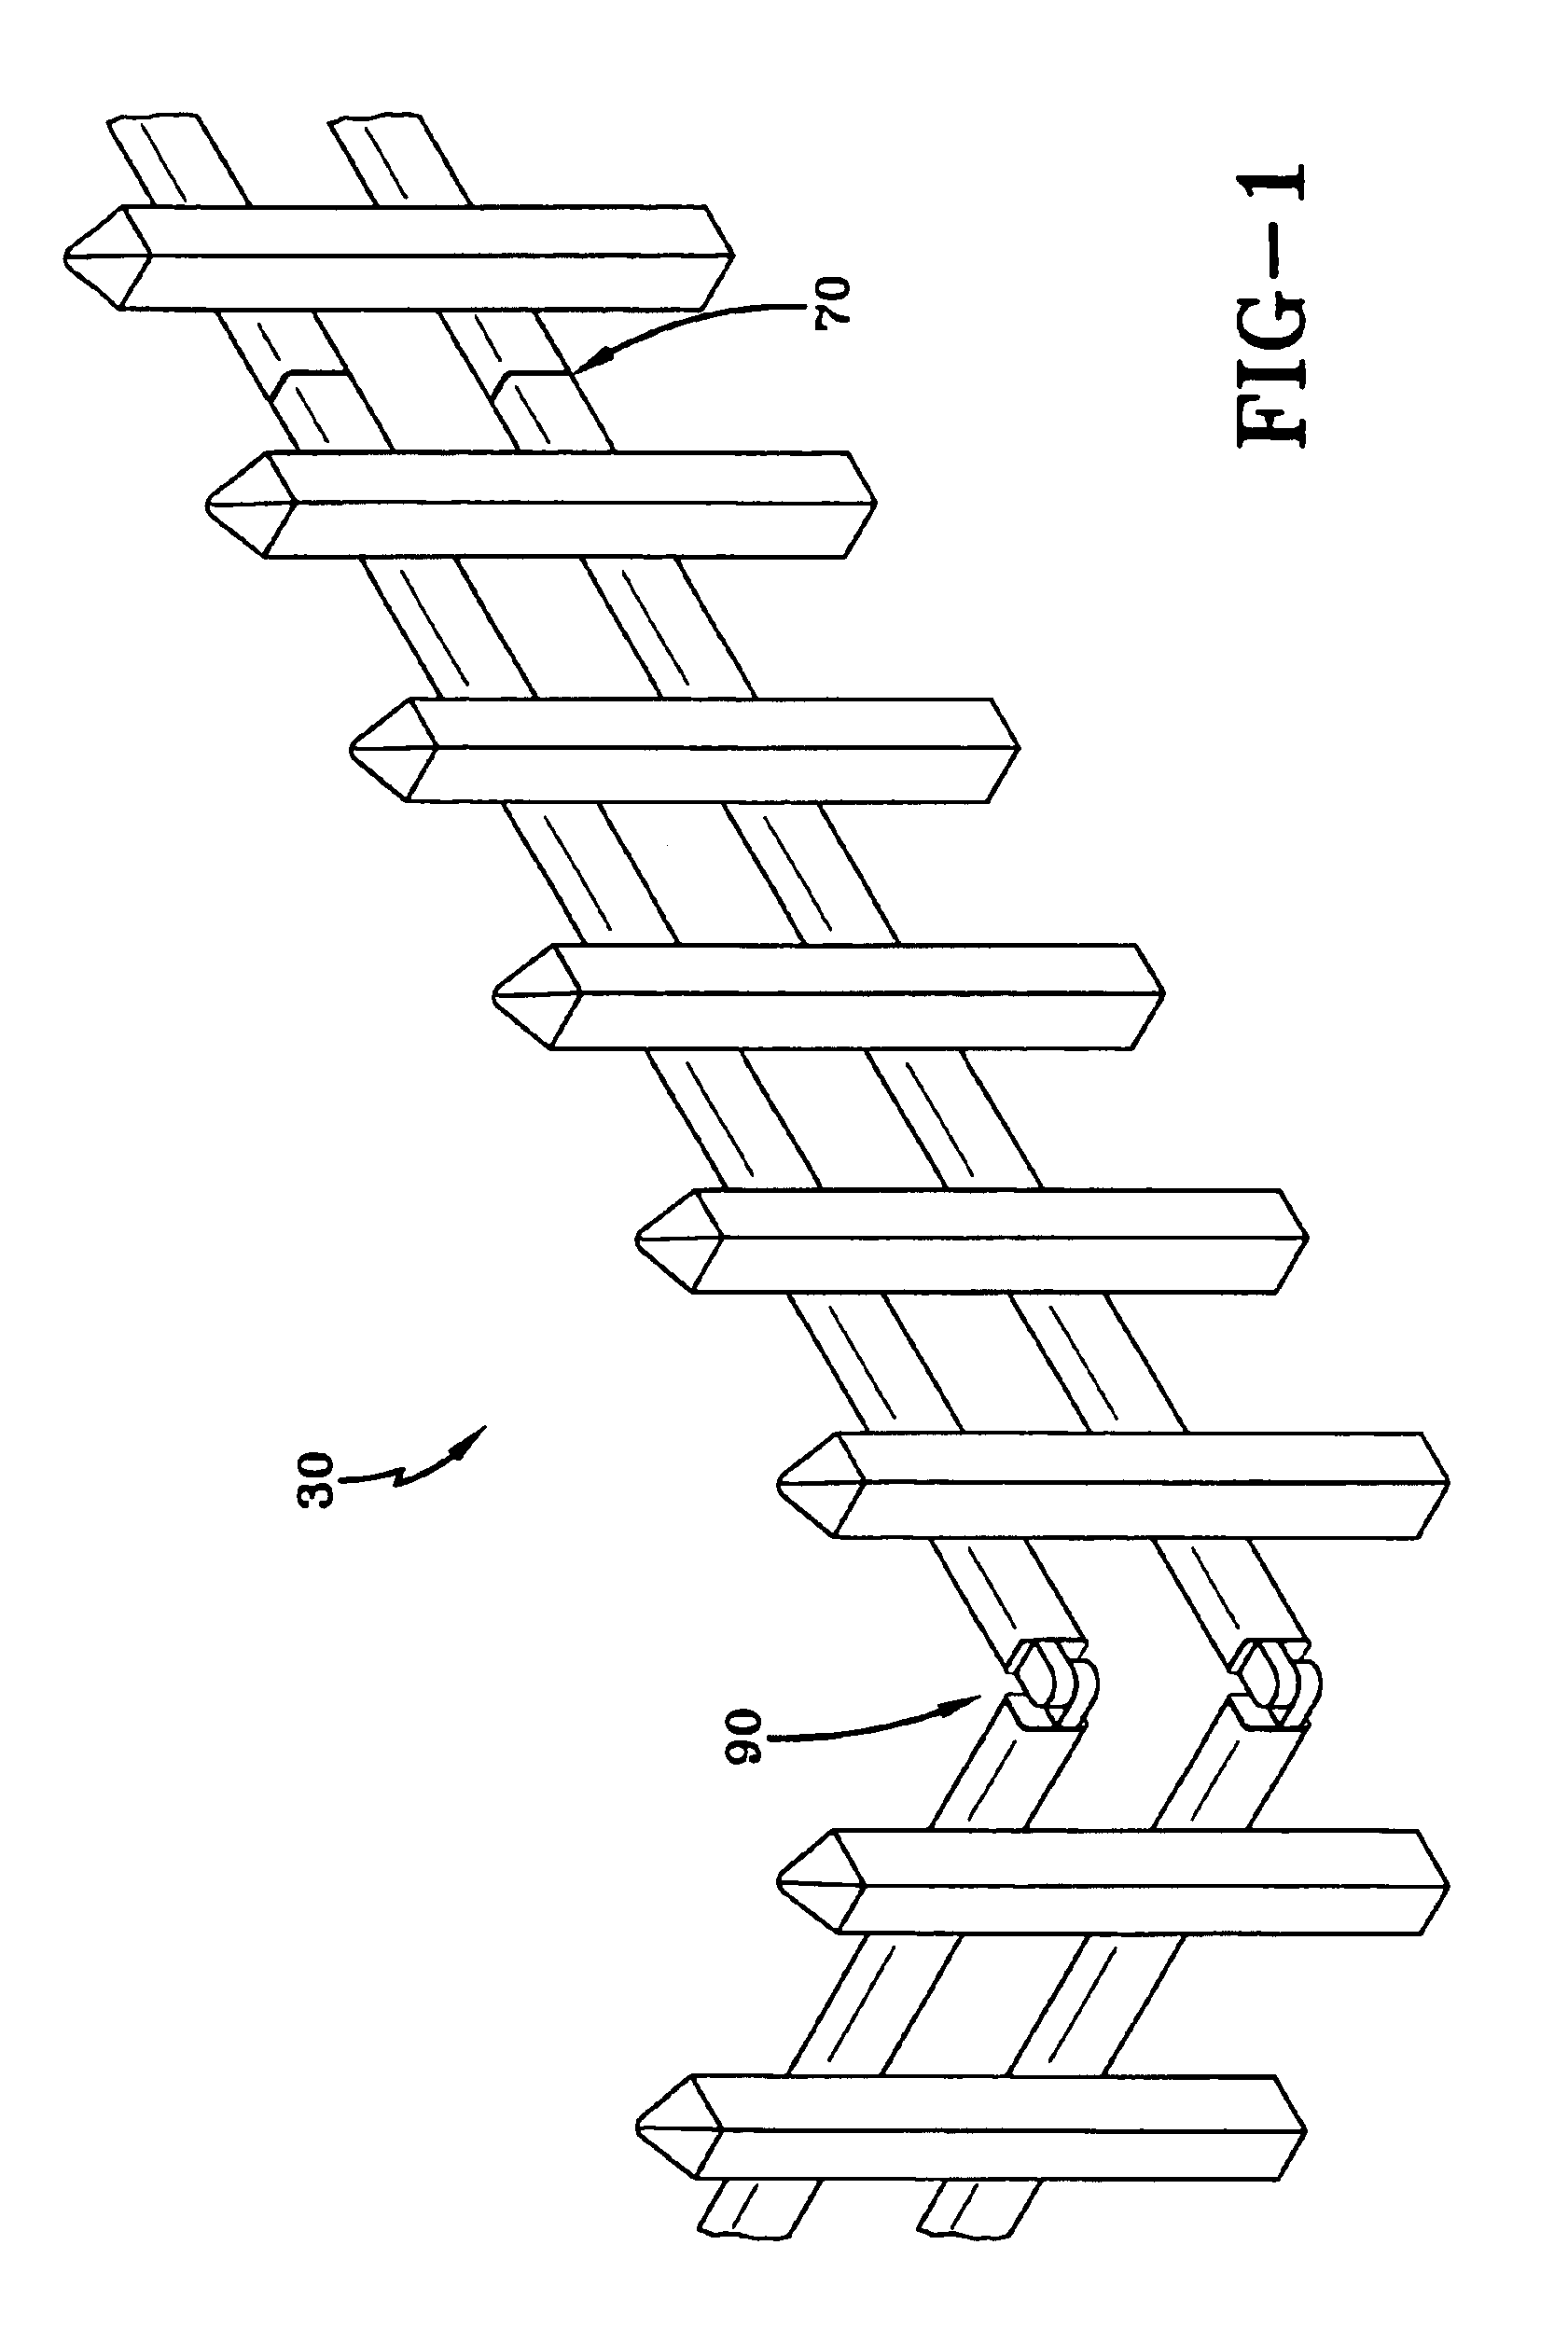 Fence assembly with connectors